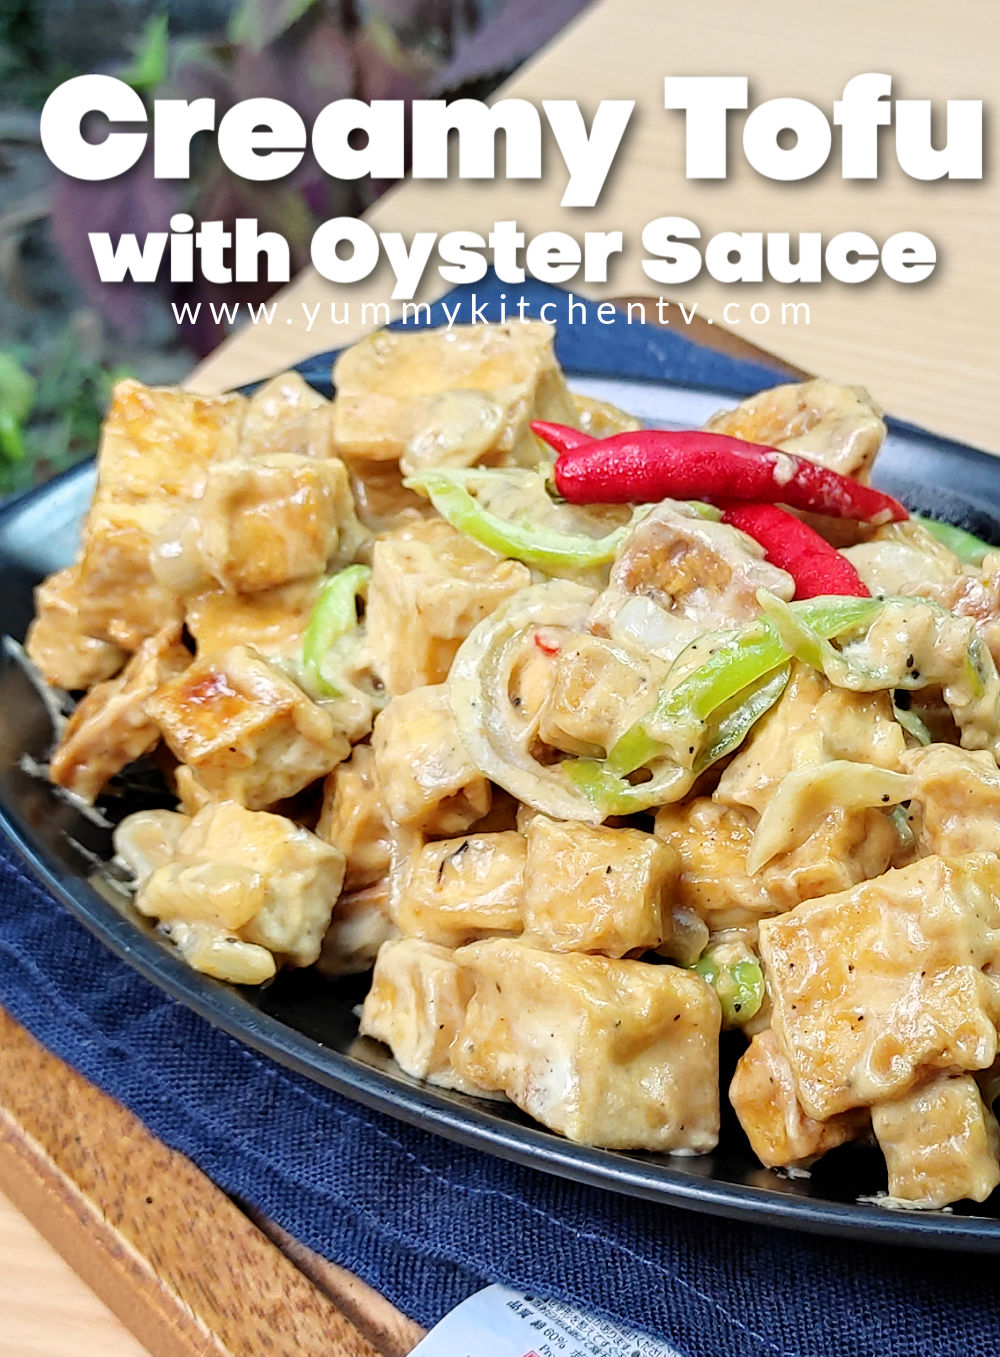 Tofu with Oyster Sauce - Yummy Kitchen